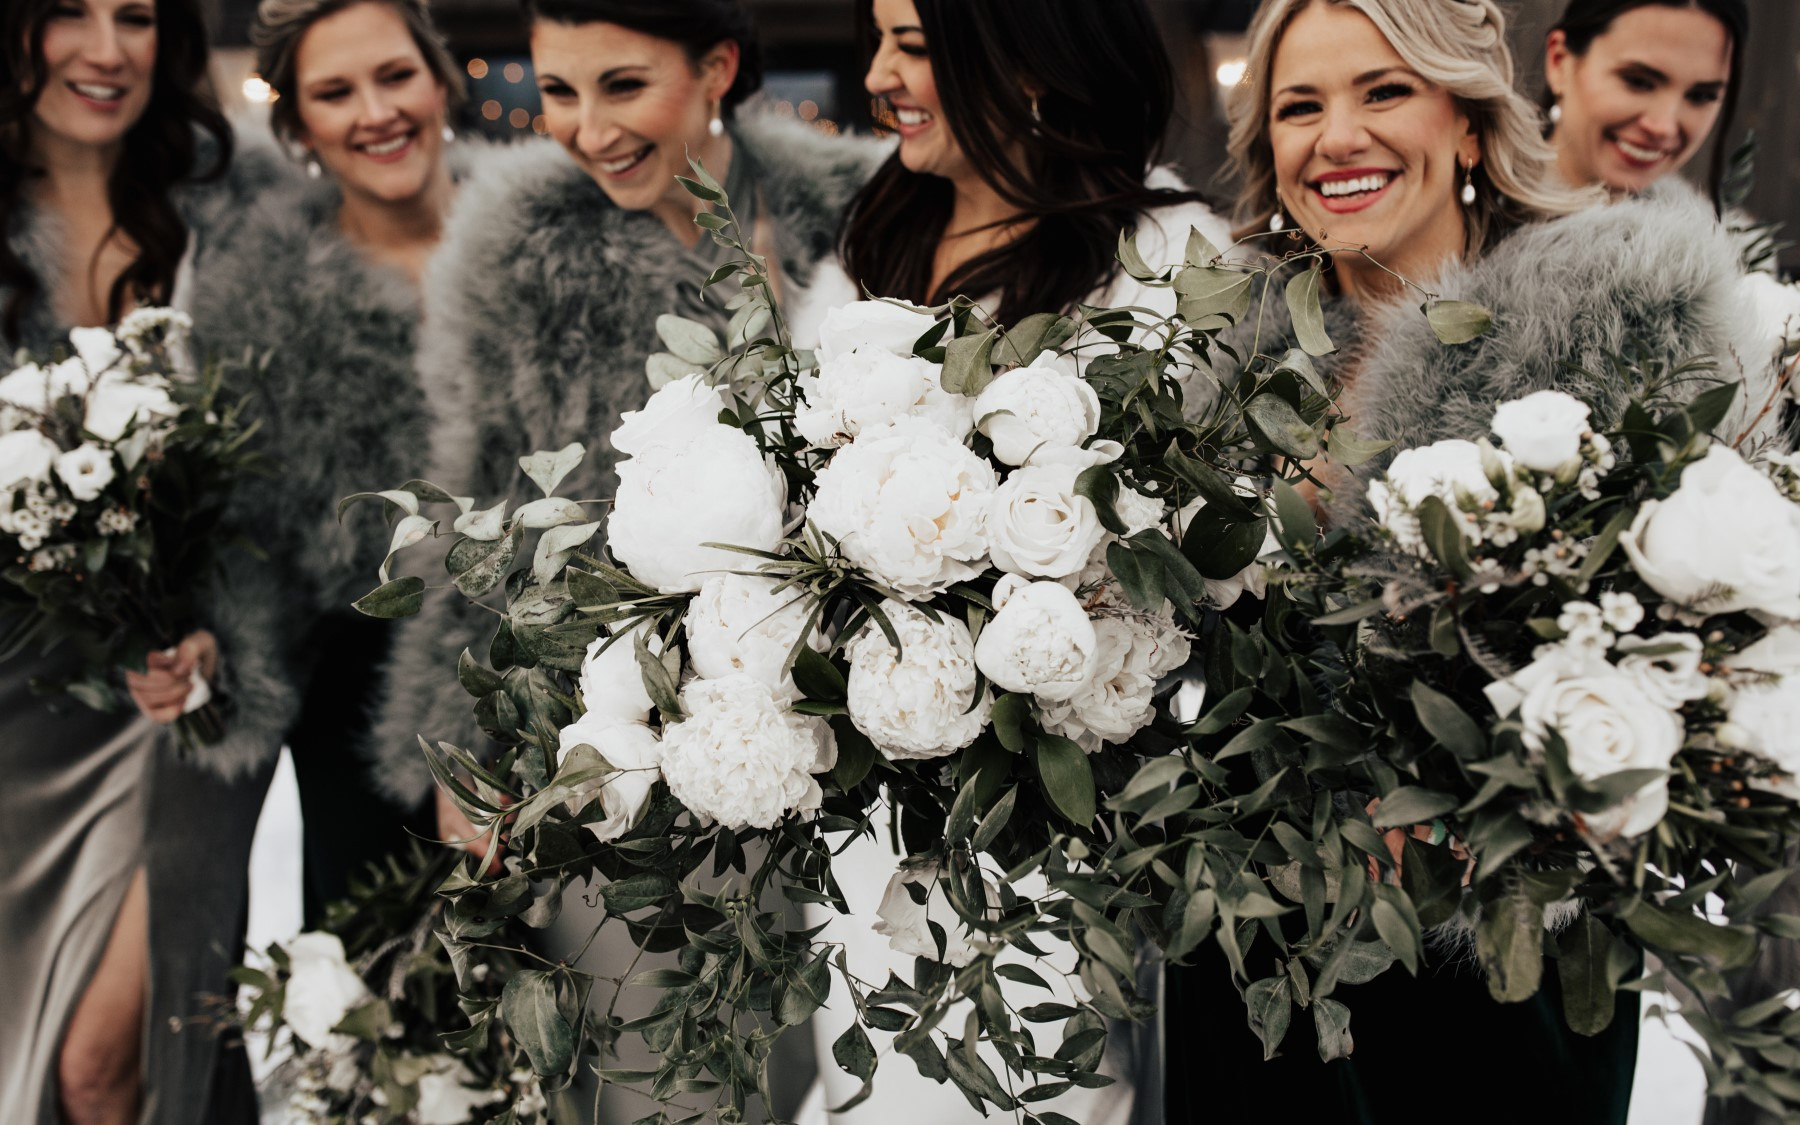 close up of floral arrangements for winter wedding featuring women in background smiling.